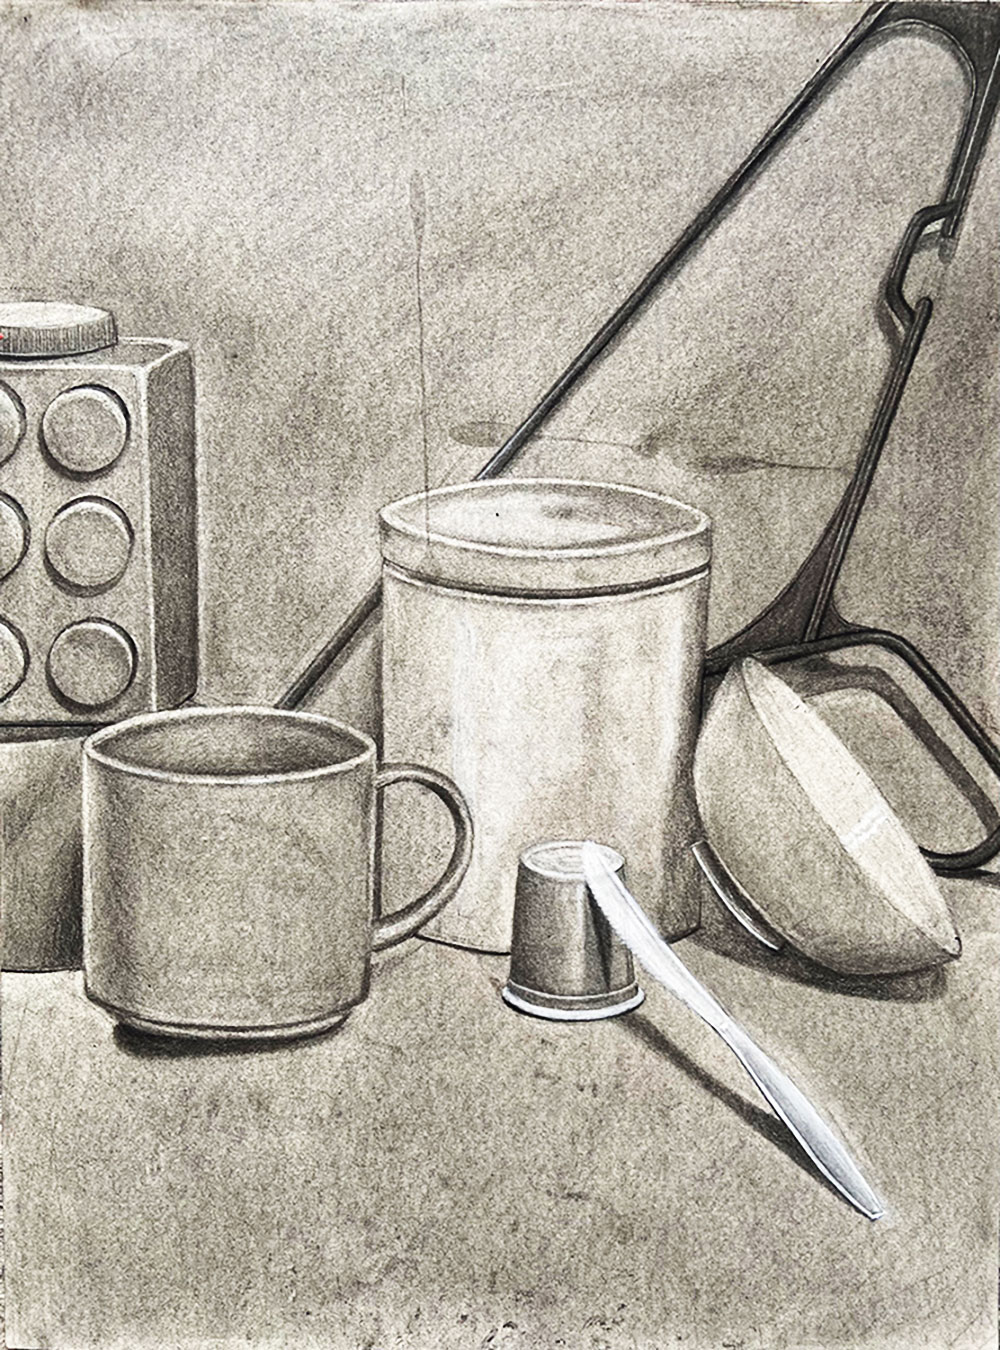 Charcoal drawing of still life includes: cups, a plastic knife, and an upside down hanger.